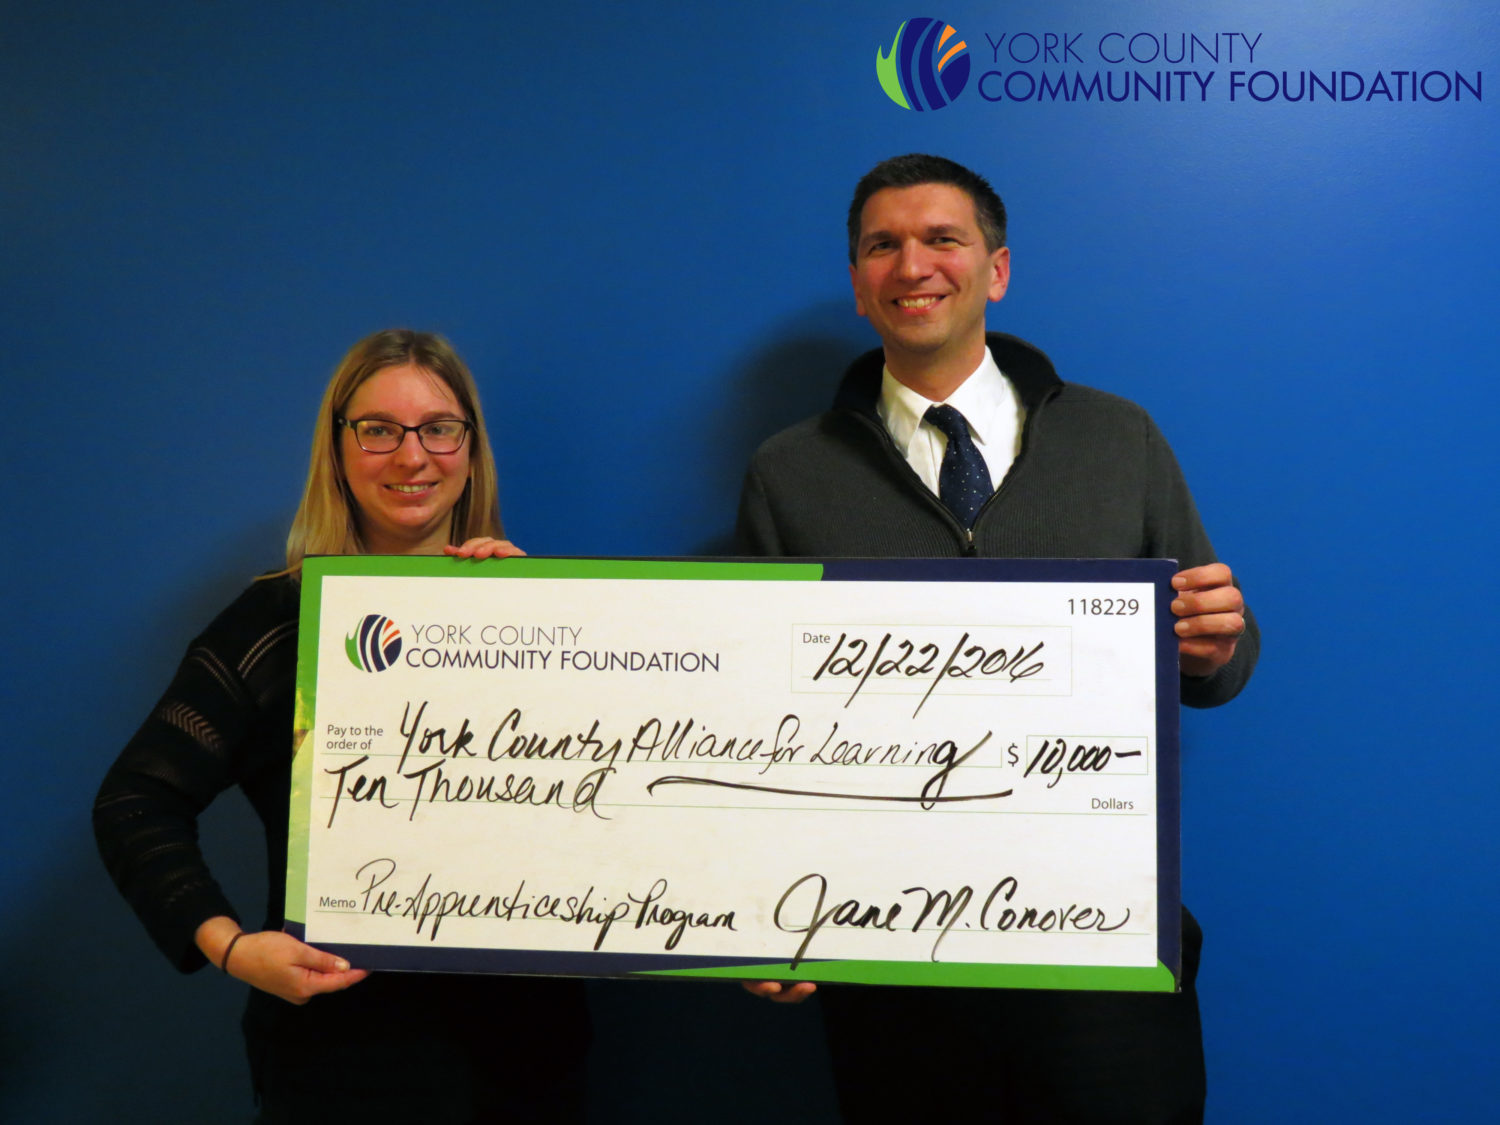 YORK COUNTY ALLIANCE FOR LEARNING RECEIVES $10,000 GRANT